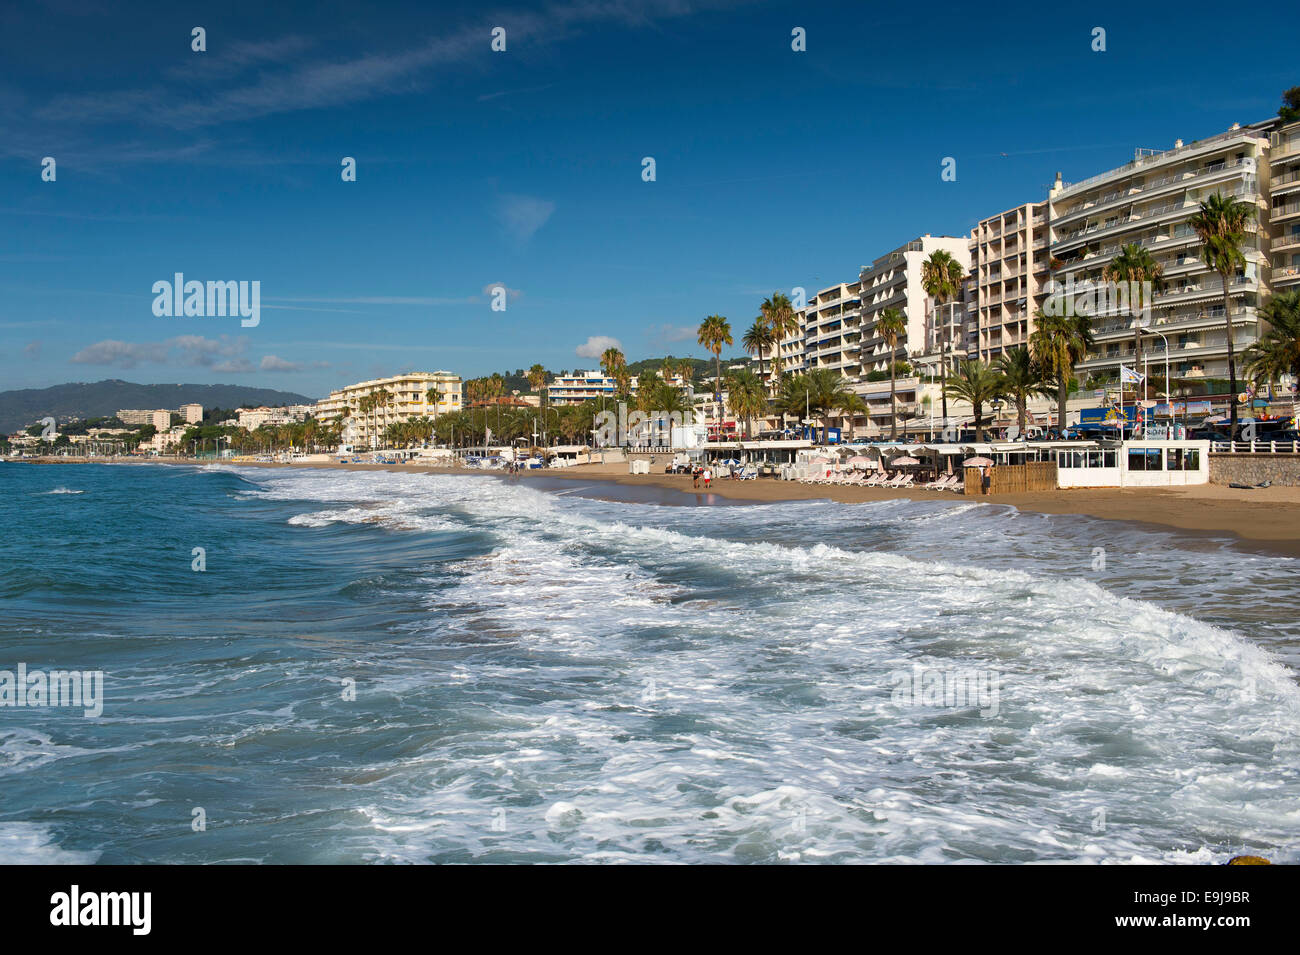 The main beach in Cannes, South of France, off the La Croisette road. Stock Photo